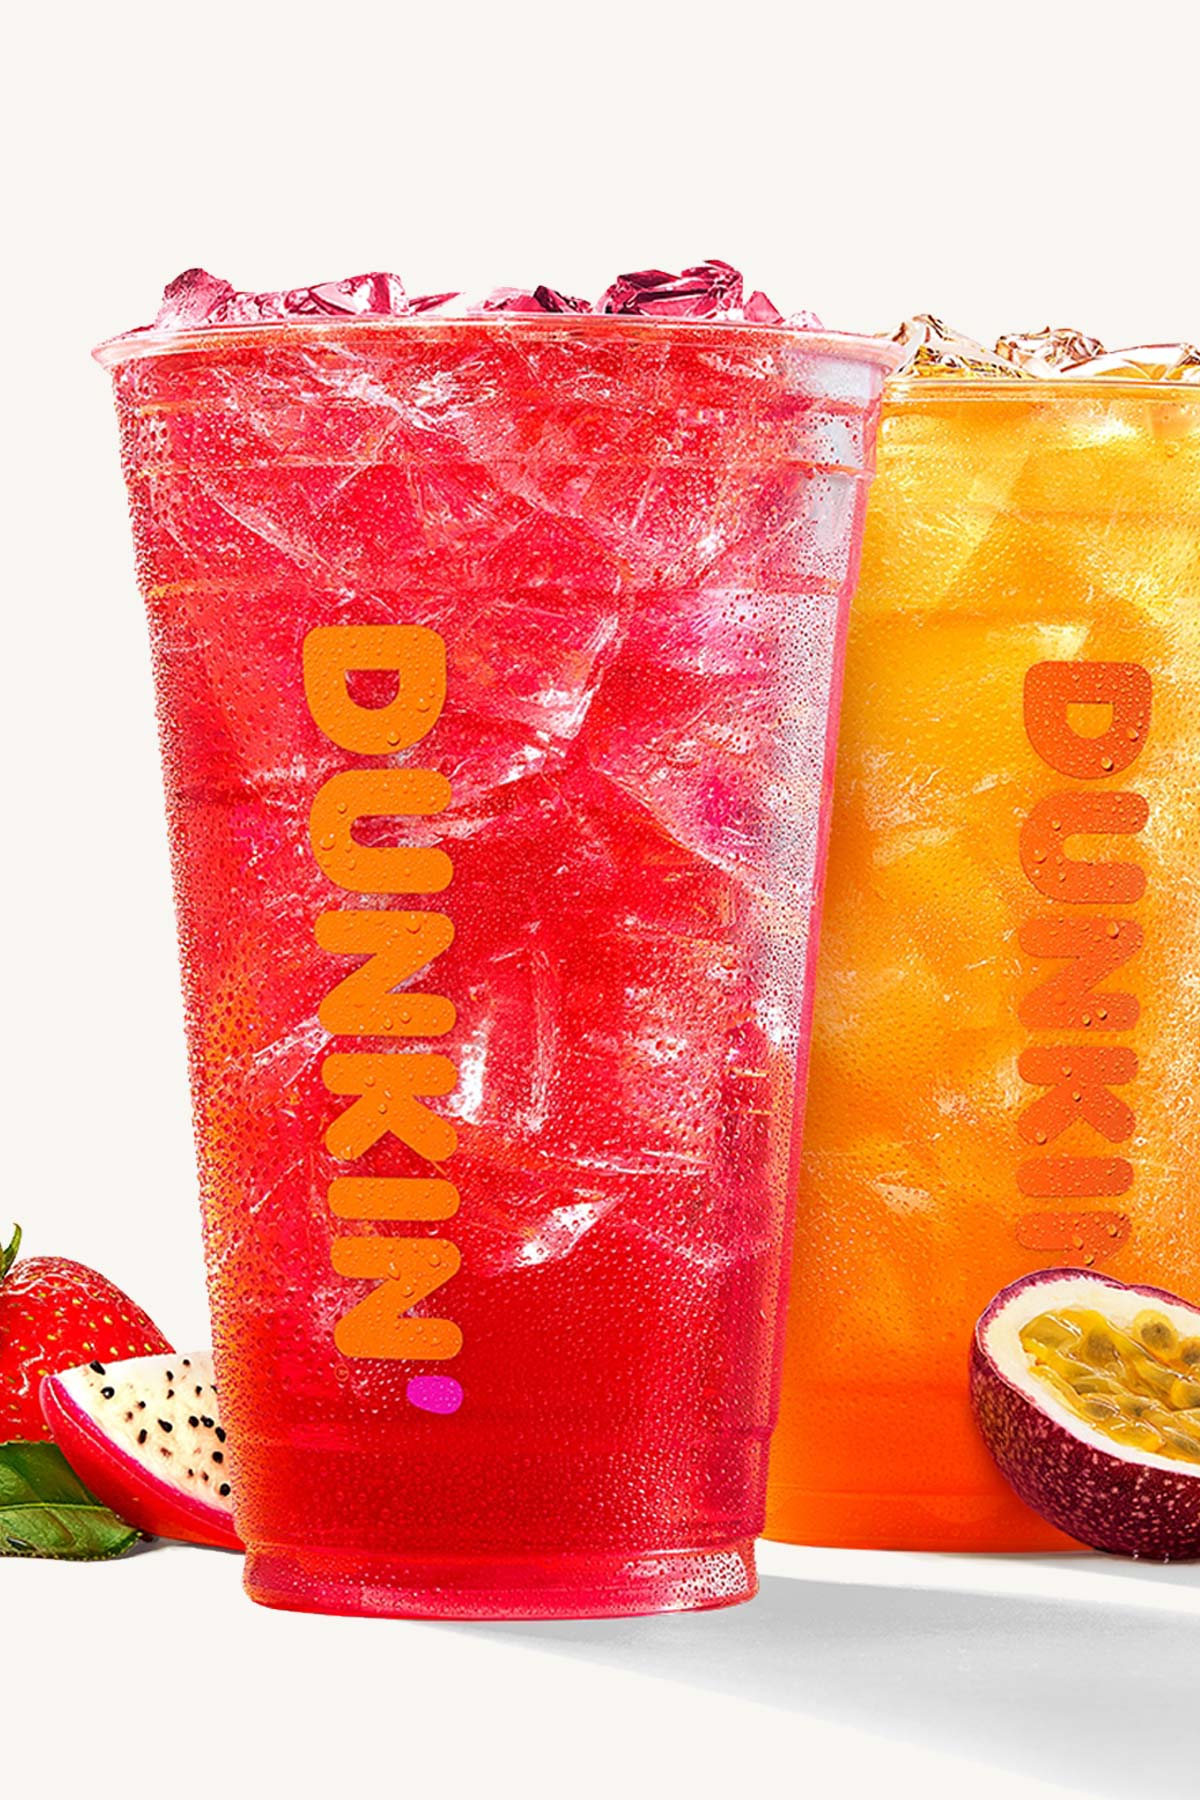 Dunkin' Refresher drinks in plastic cups.